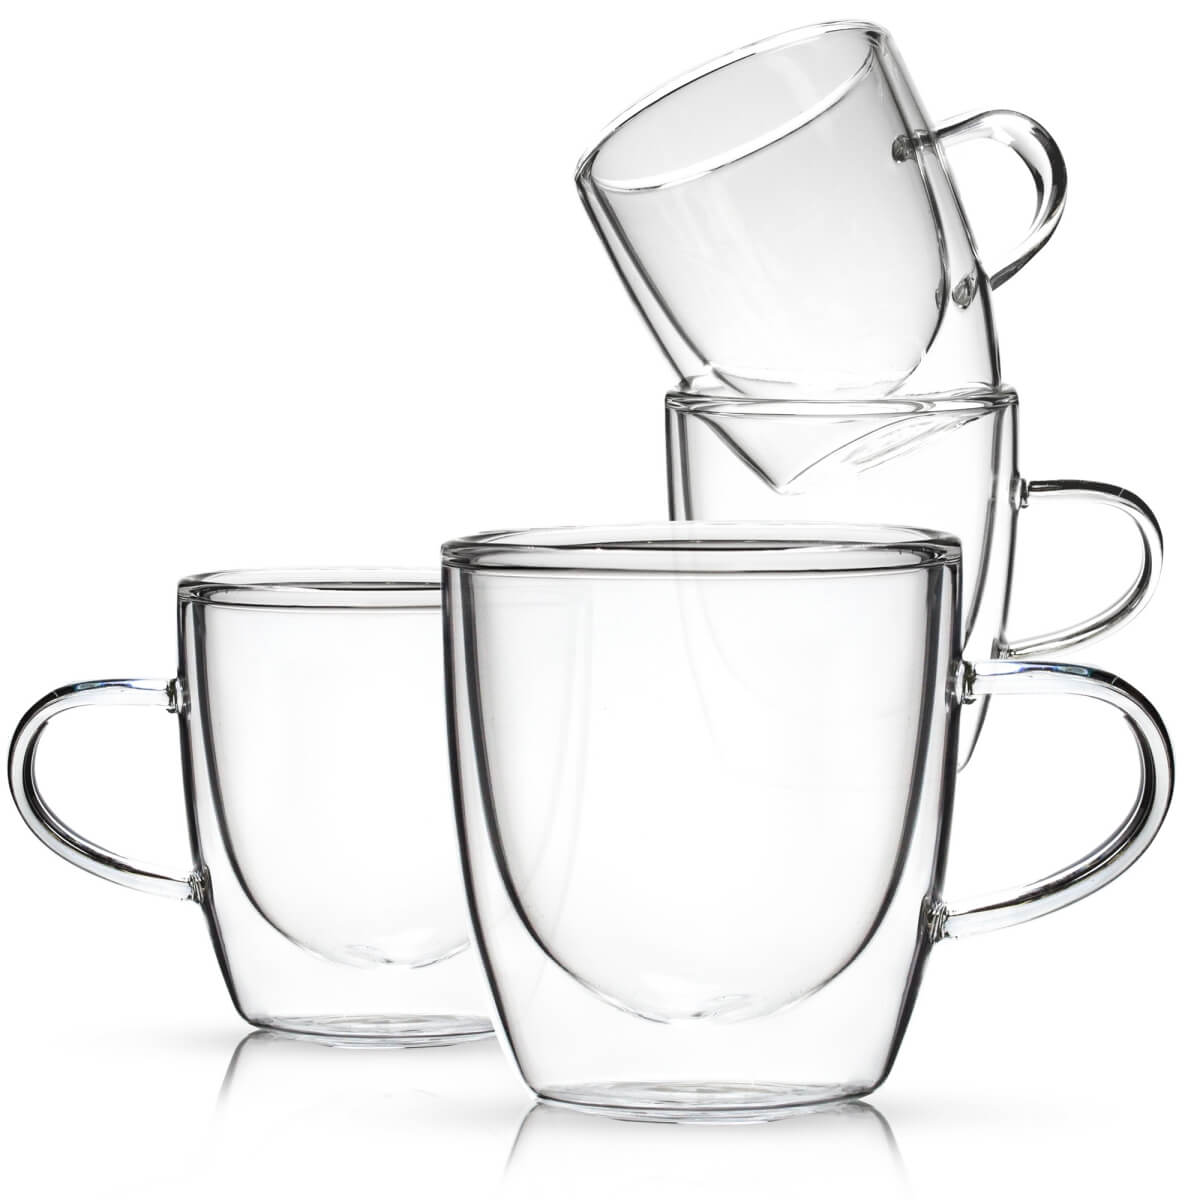 Kitchables Double Wall Glass Coffee Mugs Set of 2 16oz Insulated